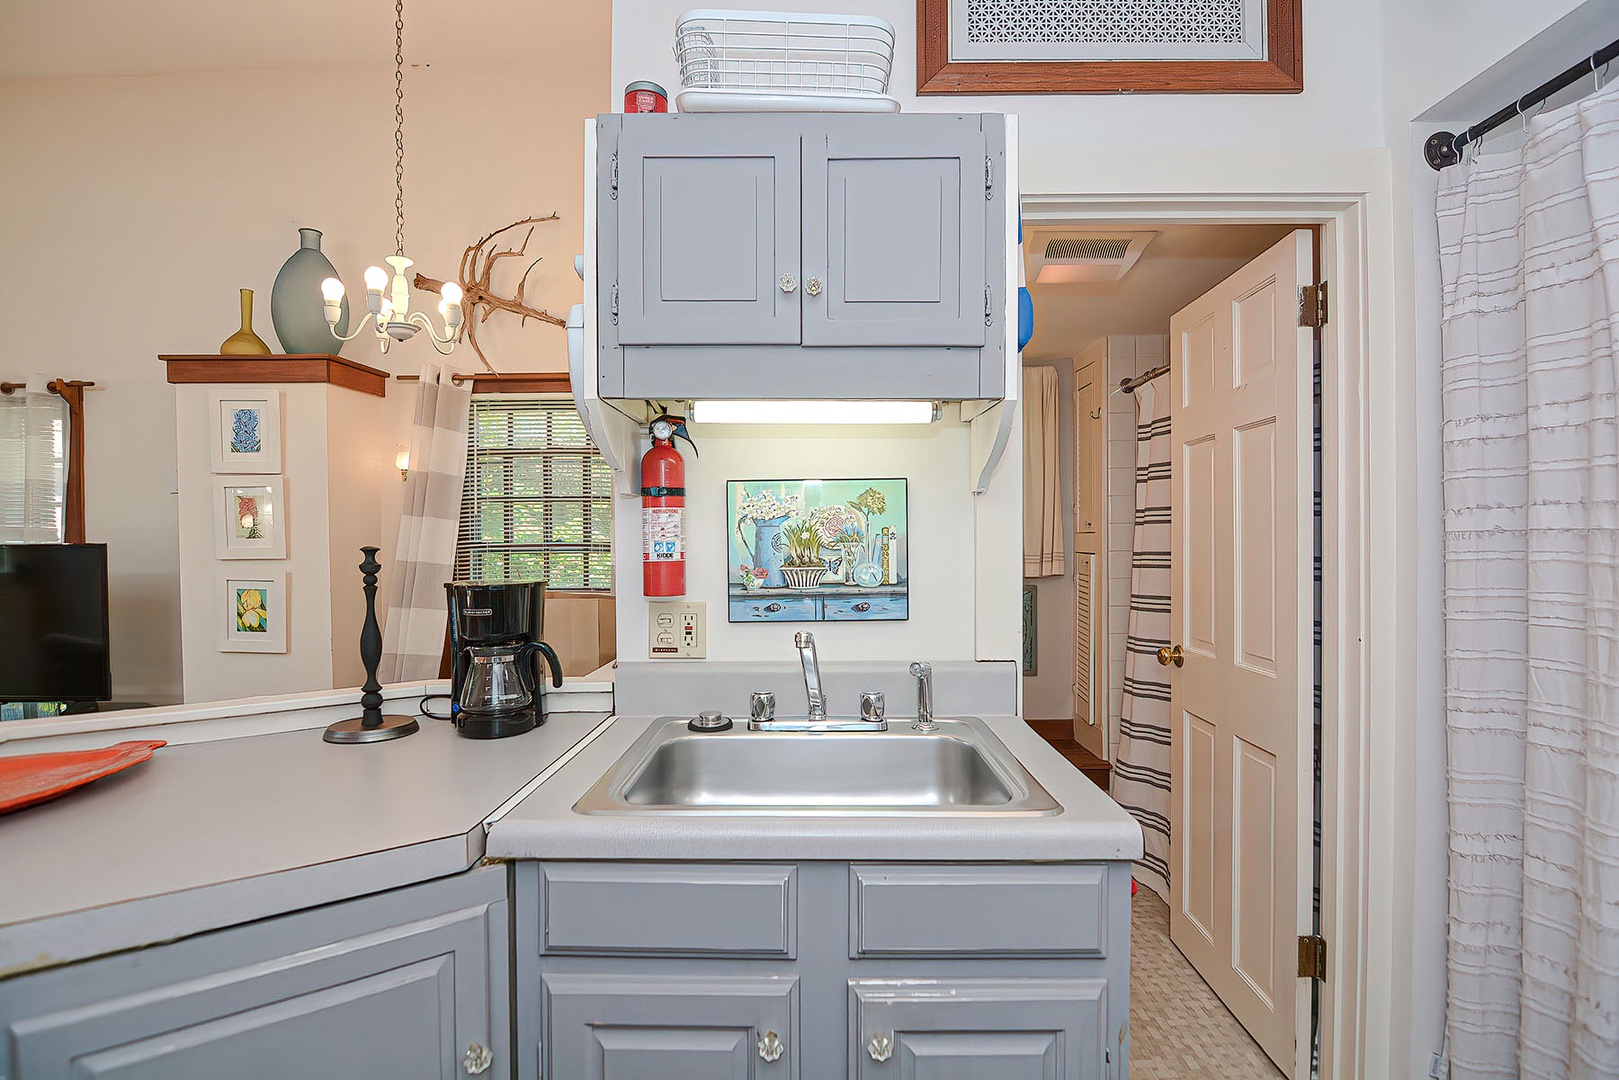 Kitchen sink and counter space.